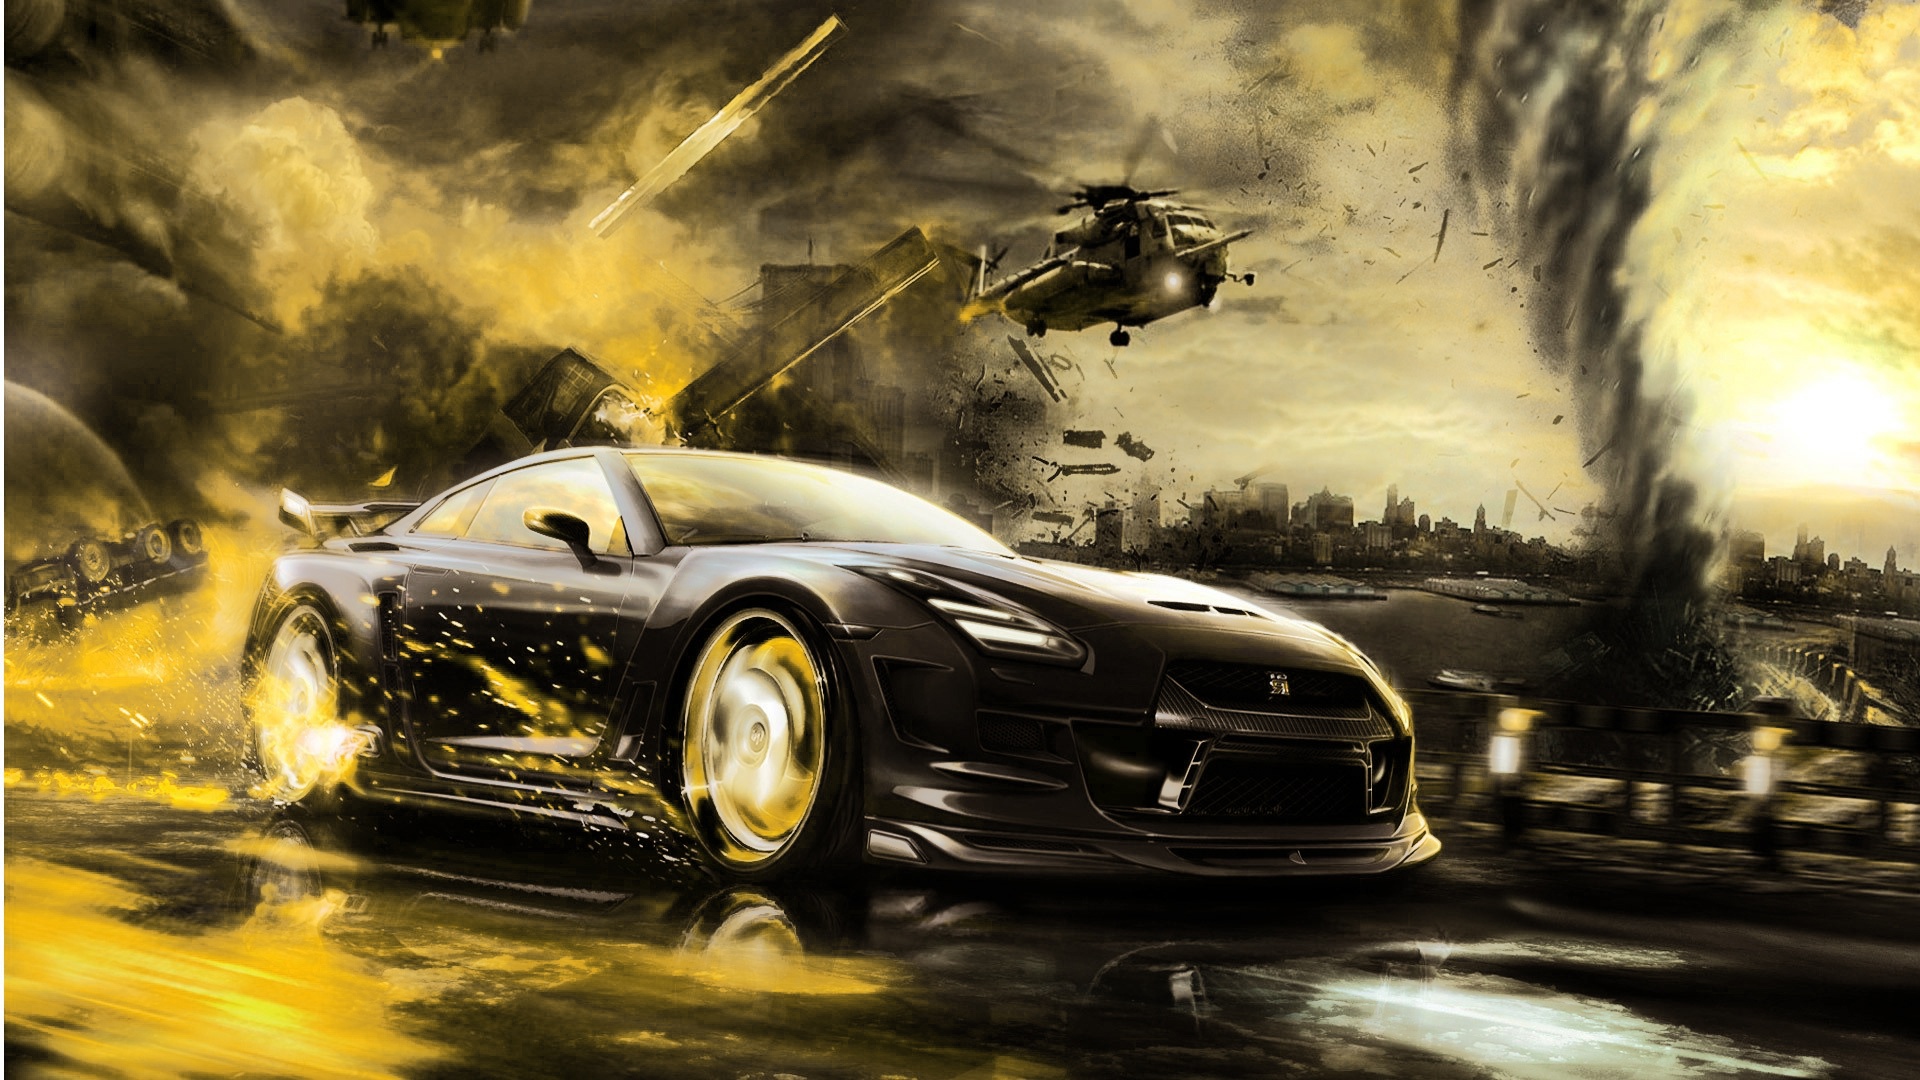  Car hd Wallpapers 1080p Awesome Collection Unique HD Wallpapers